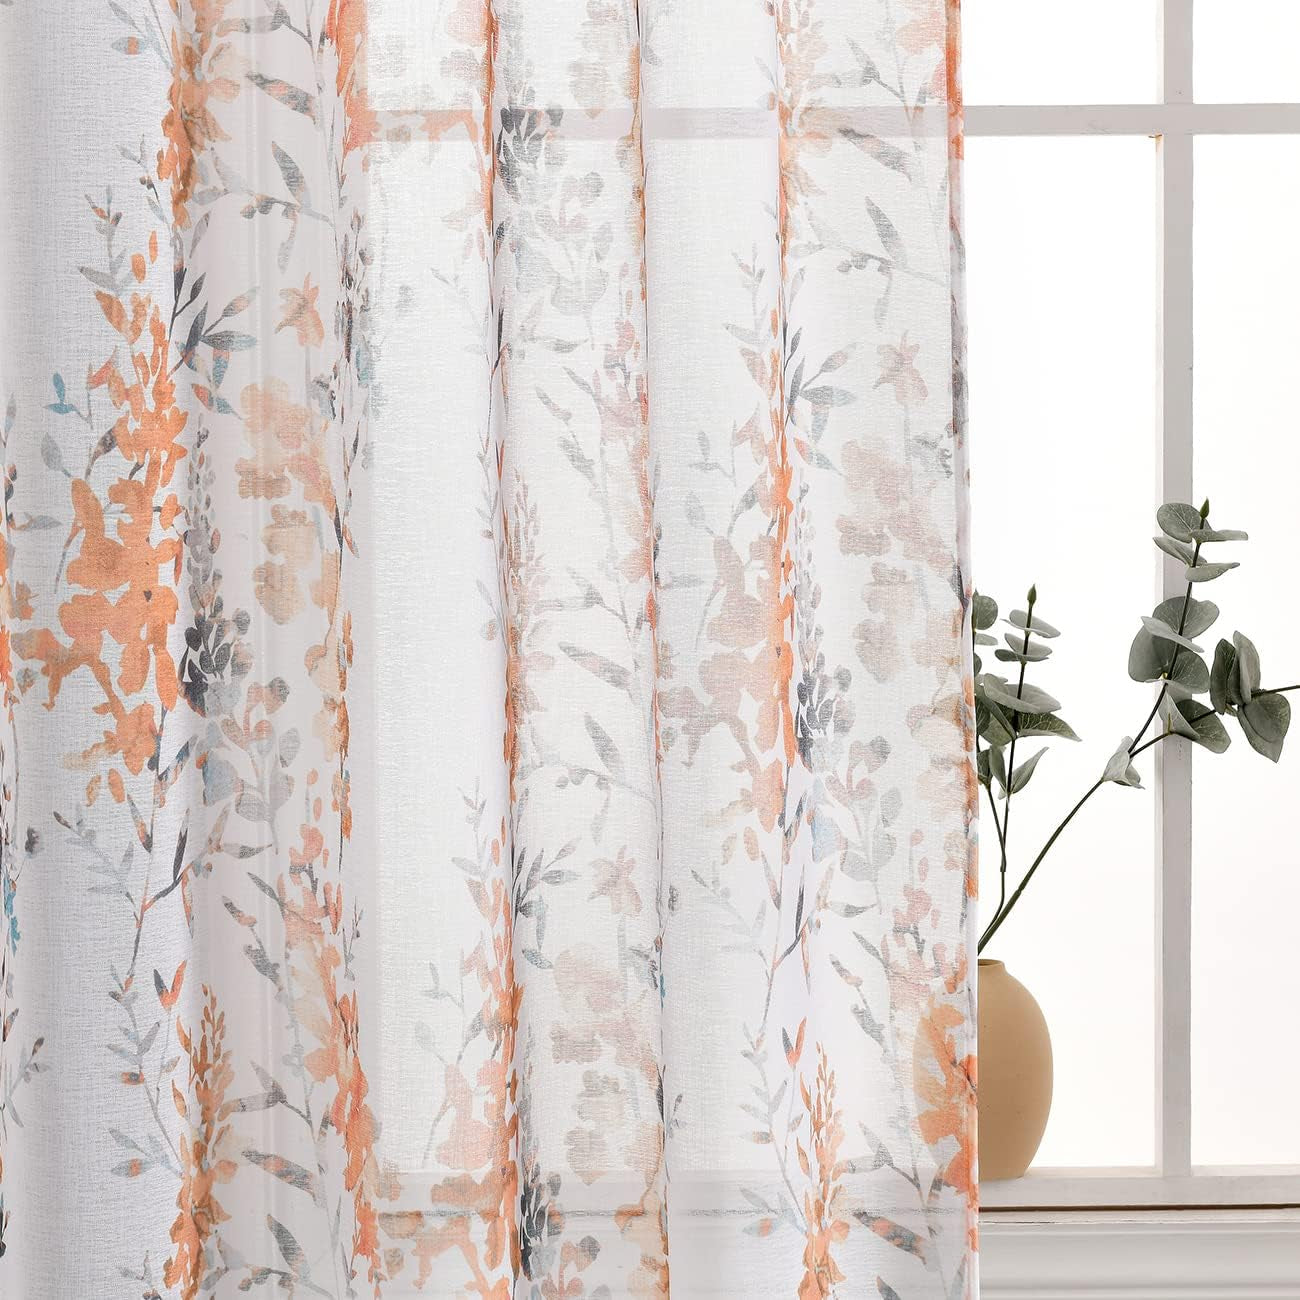 Kotile Grey White Sheer Curtains, Classic Vintage Branch Leaf Printed Sheer Curtains 63 Inch Length 2 Panels Set, Privacy Rod Pocket Sheer Window Floral Curtains, 50 X 63 Inch, Grey  Kotile Textile Orange W50 X L96 Inch 